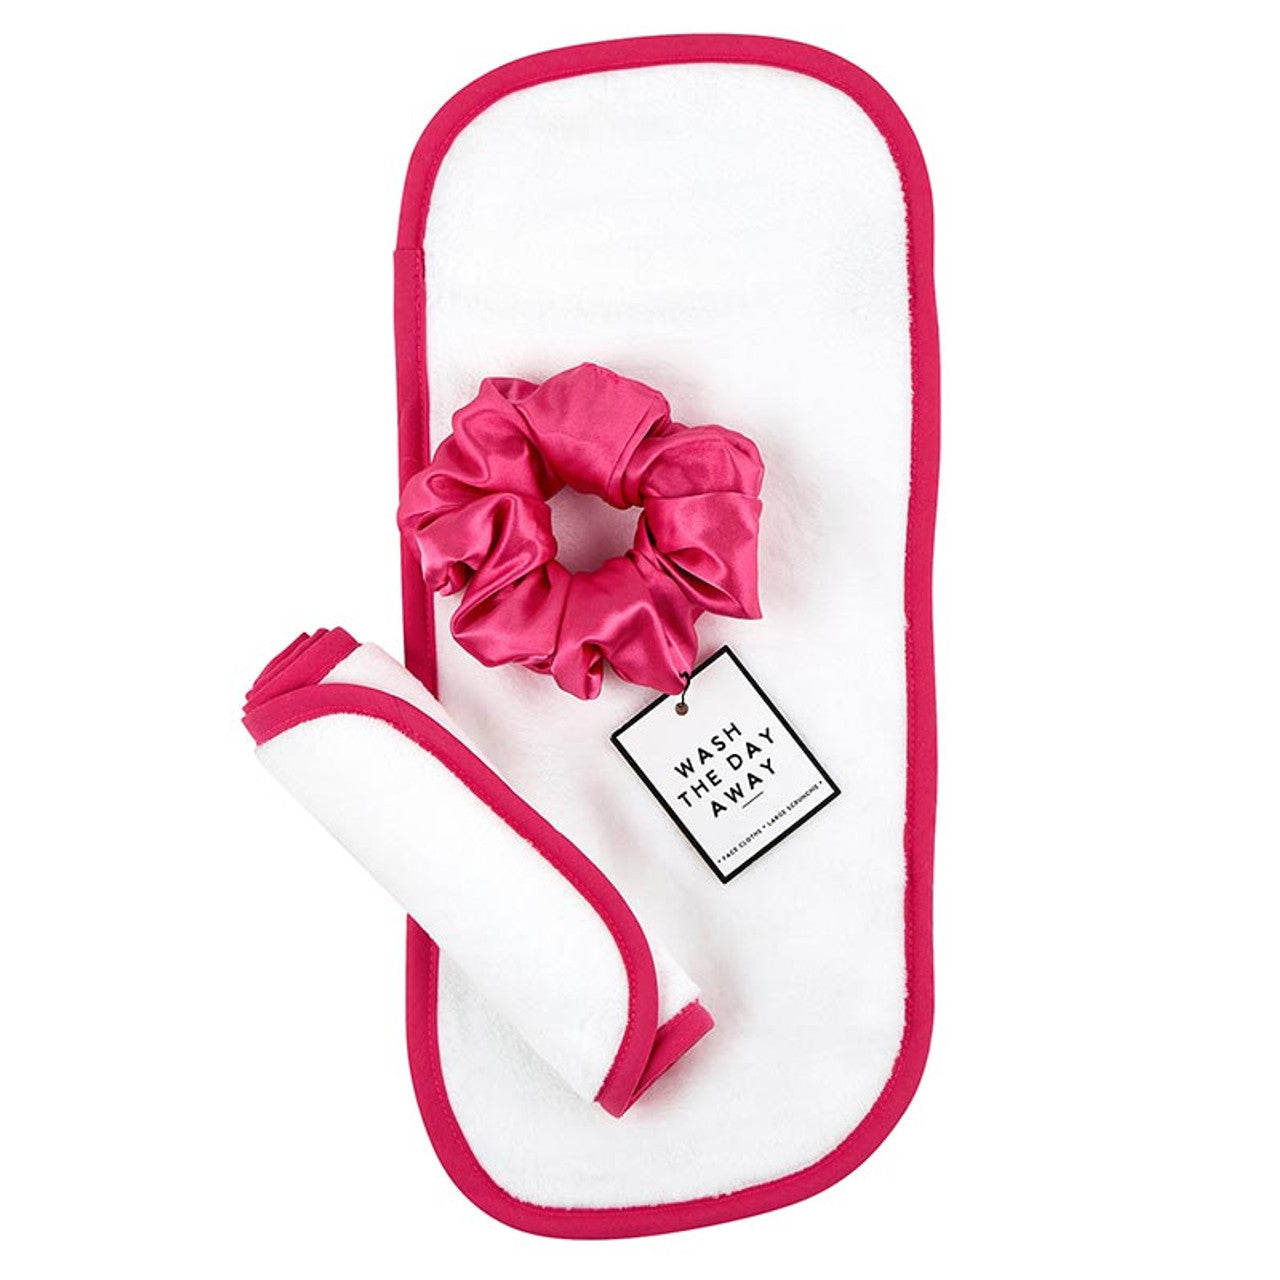 Wash the Day Away Face Cloth + Scrunchie Set, Assorted Colors